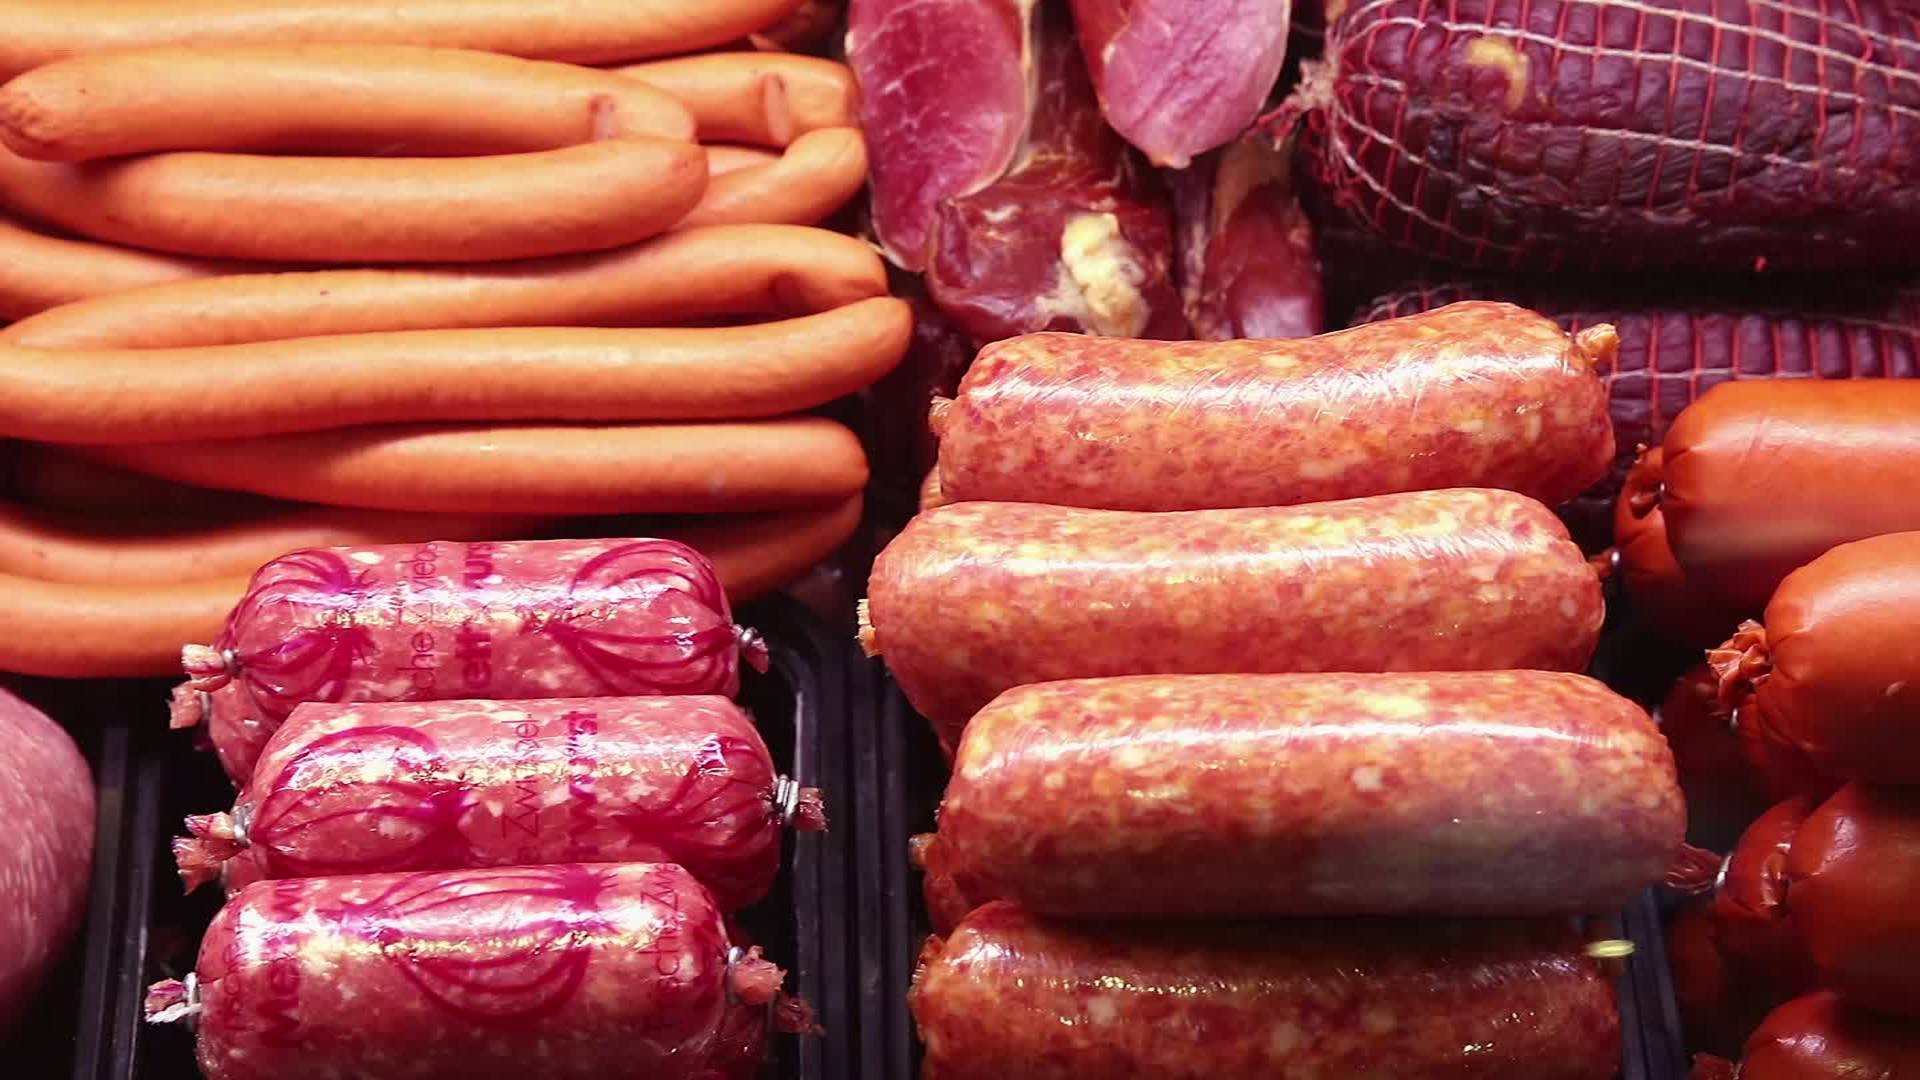 How bad for you are processed meats? - CNN Video